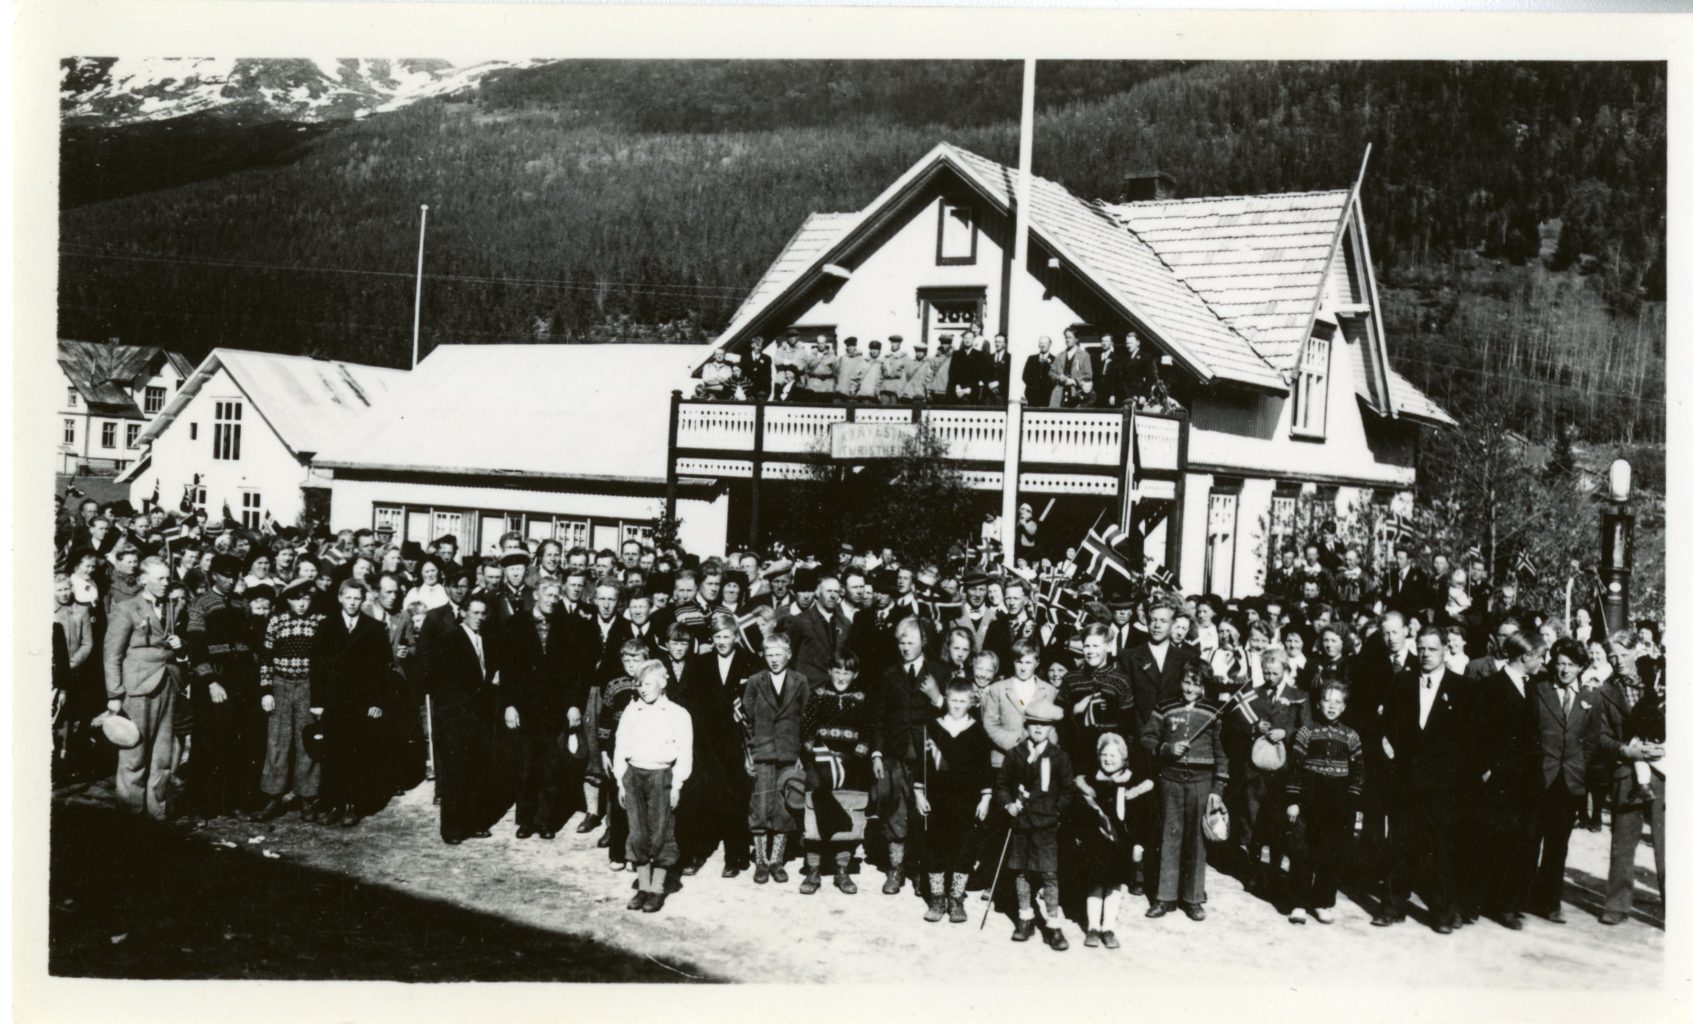 A large crowd poses for a photo outside of building.